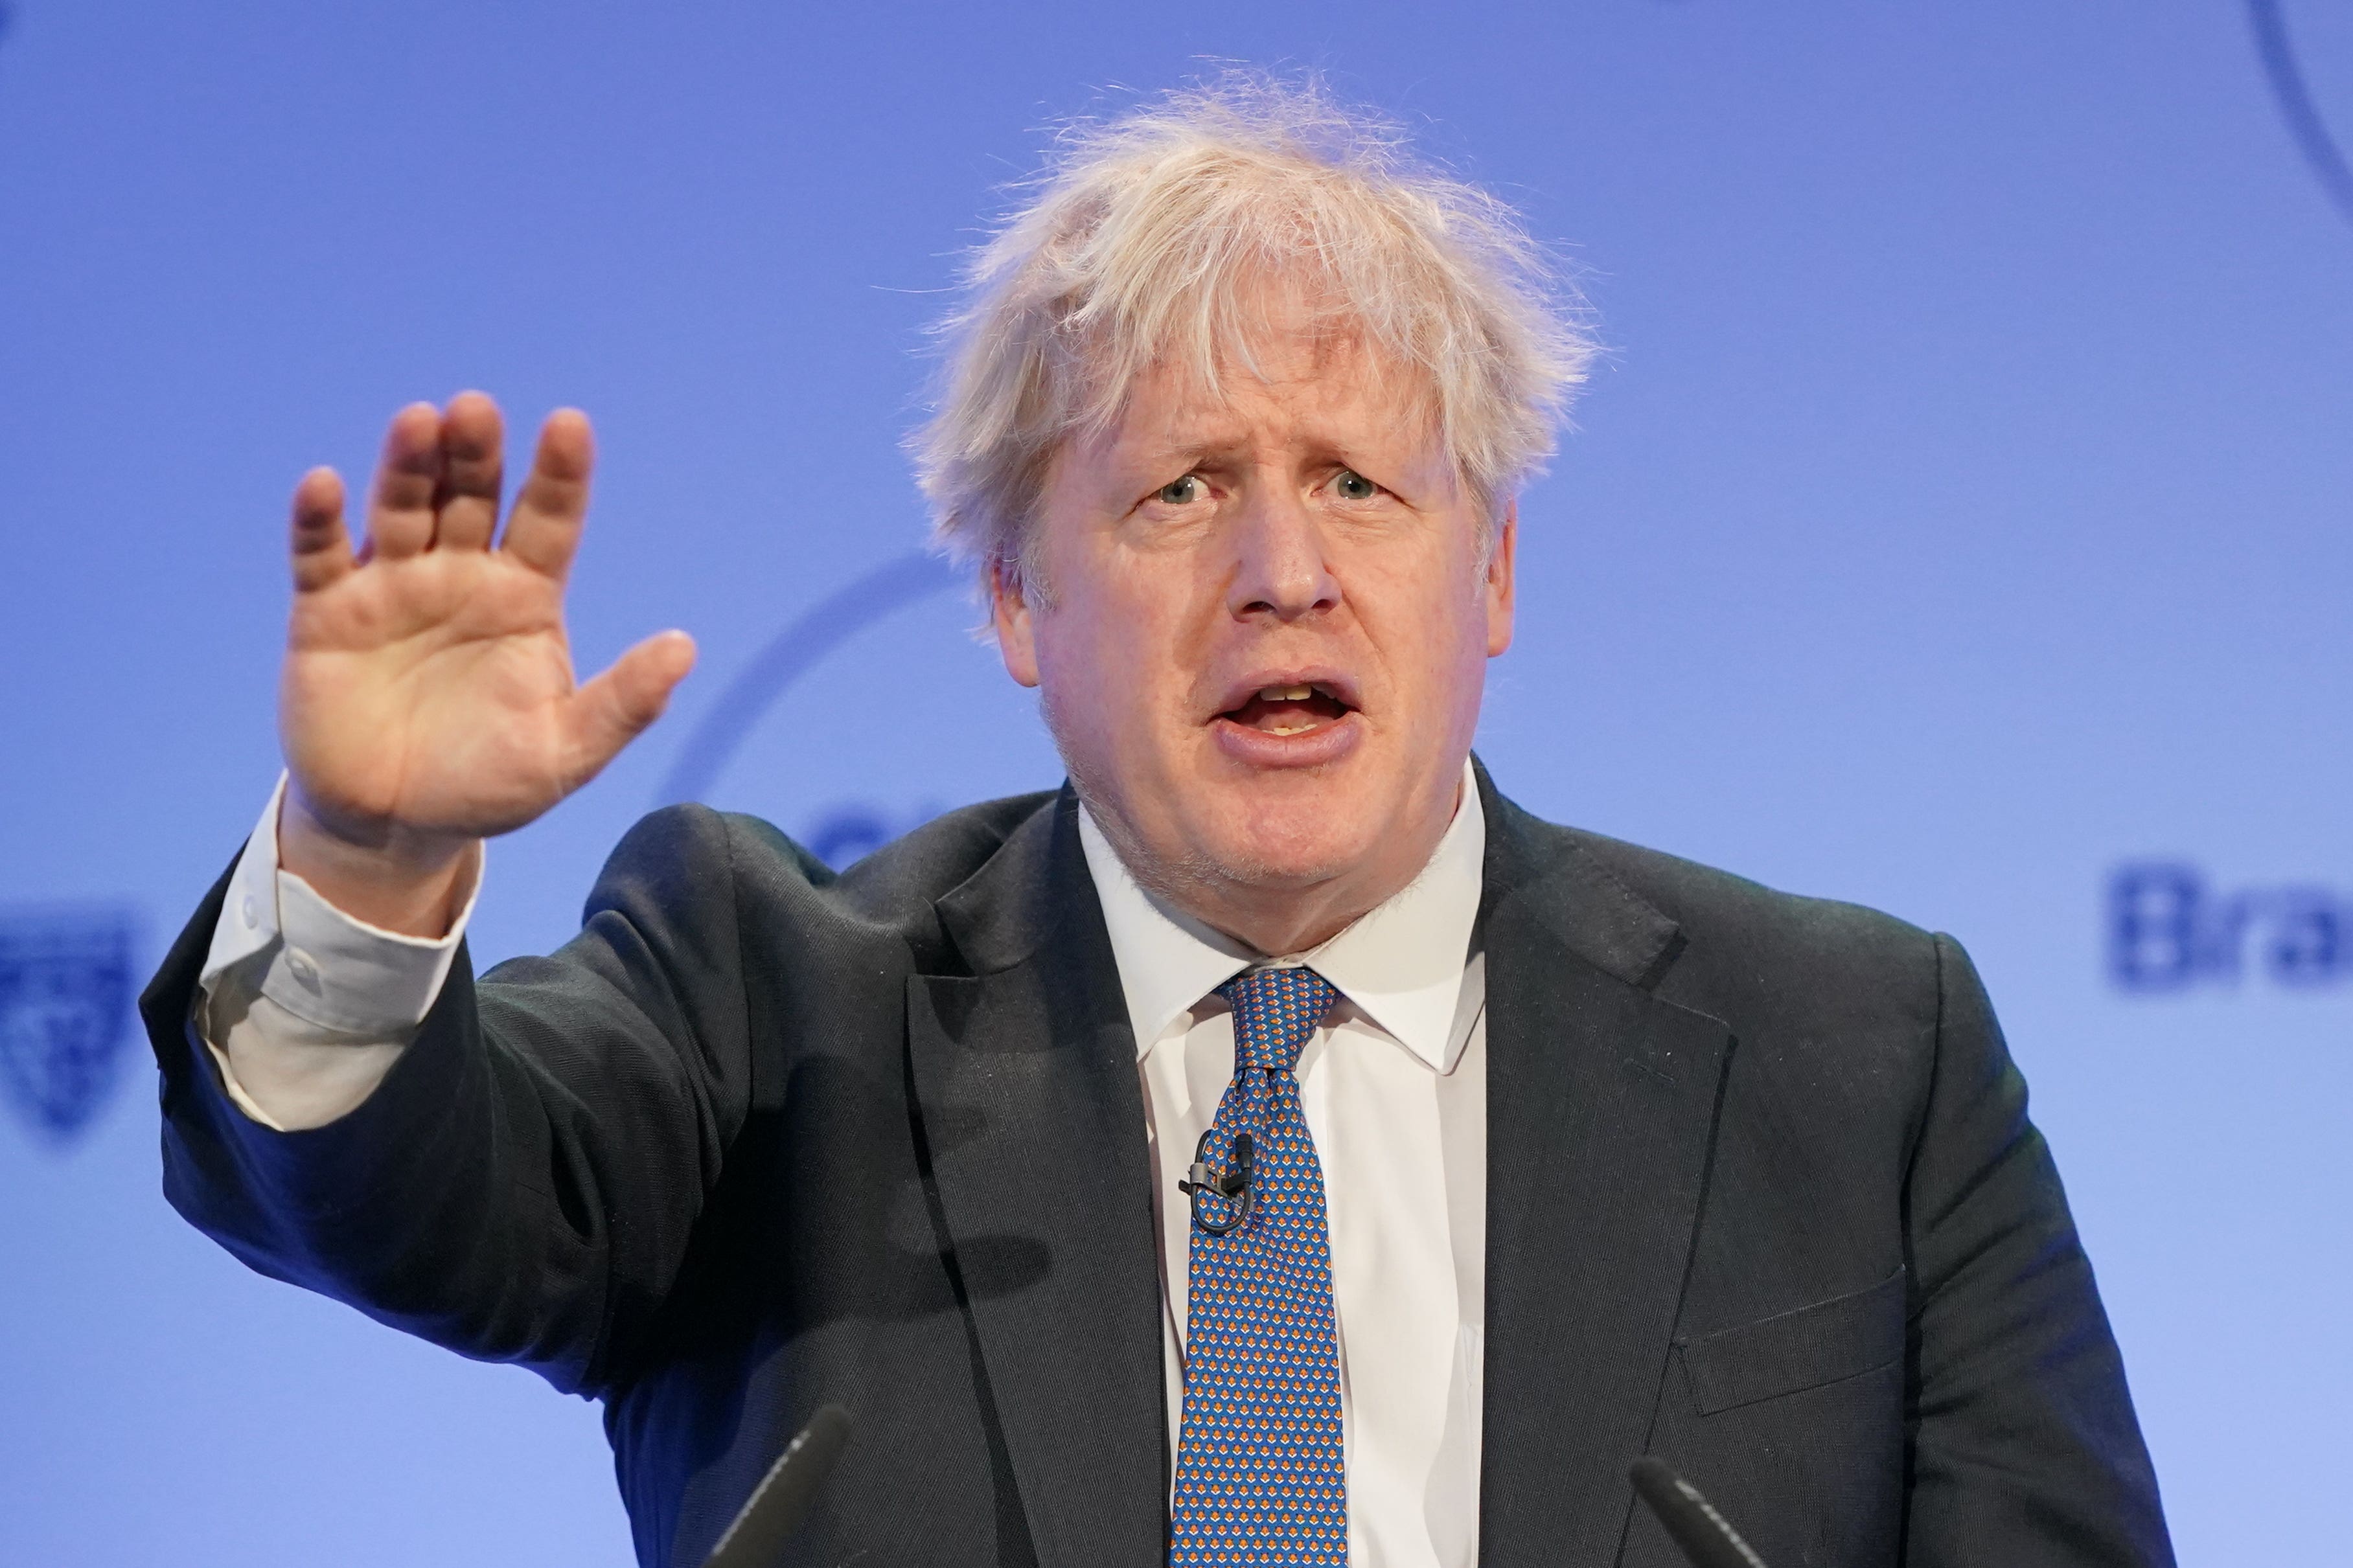 Boris Johnson has offered to hand his unredacted WhatsApp messages directly to the Covid Inquiry (Jonathan Brady/PA)